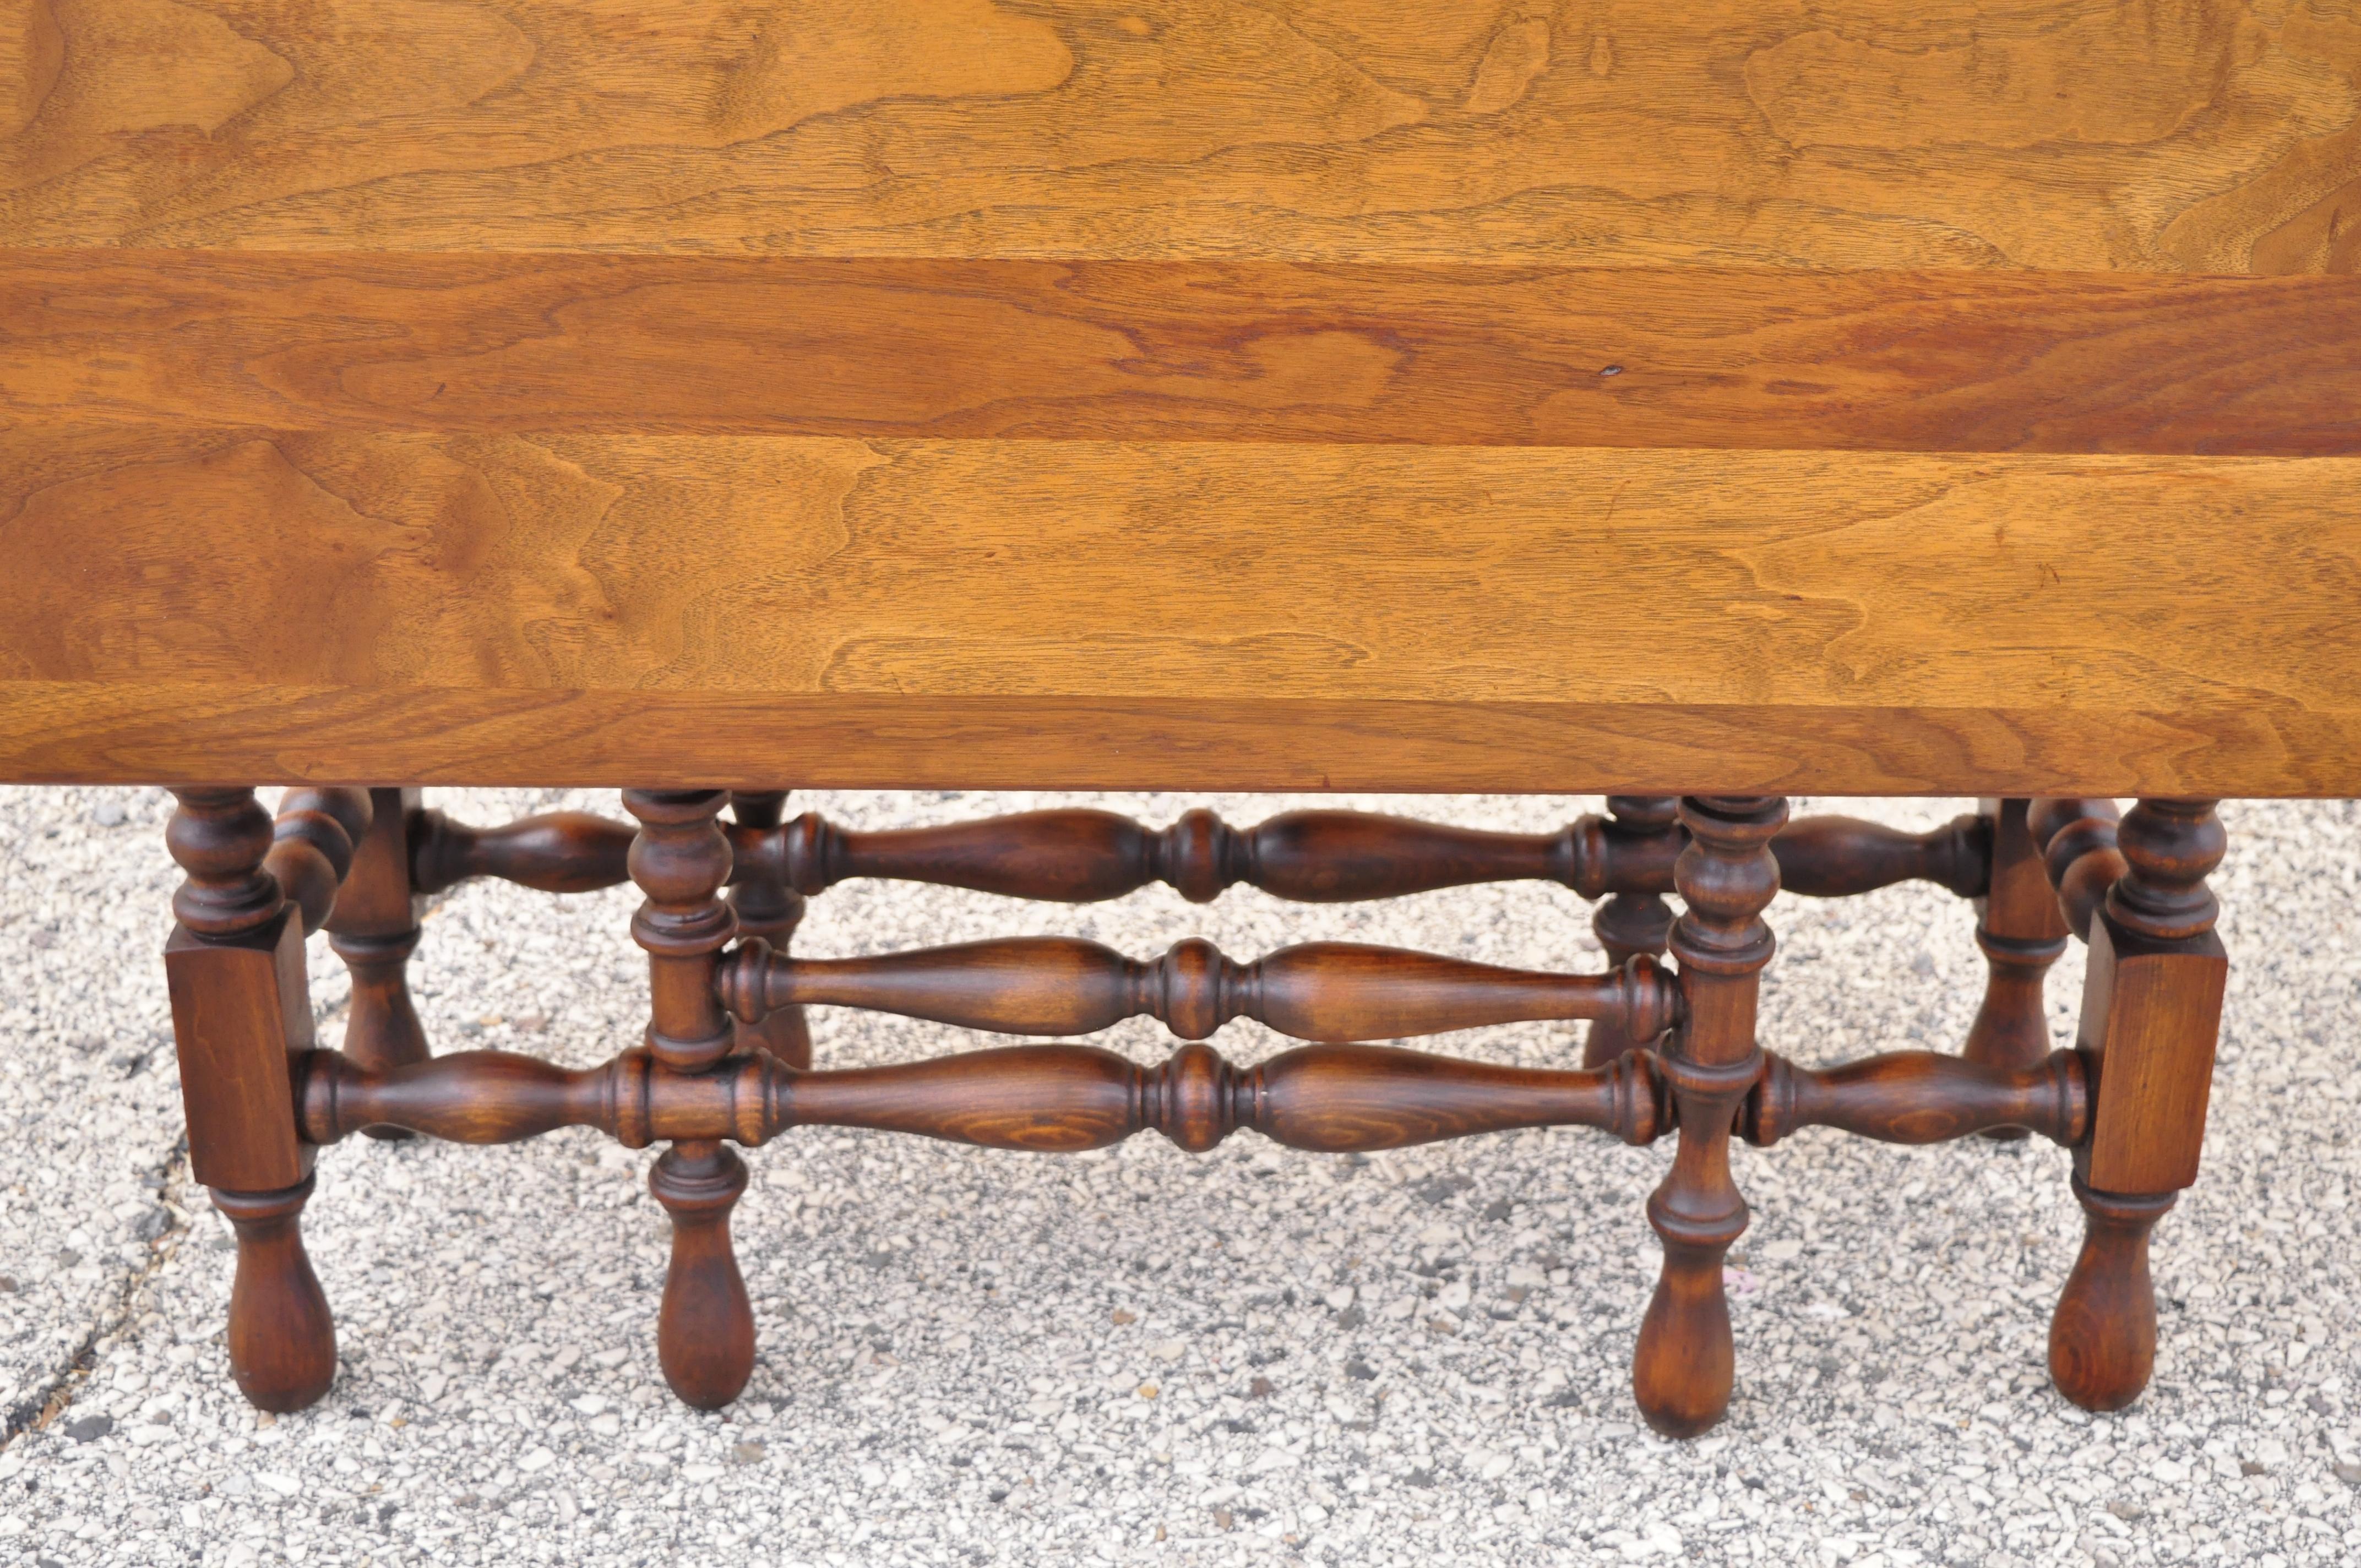 Antique Jacobean Walnut Drop Leaf Gate Leg Dining Table with Drawer by Brandt 1